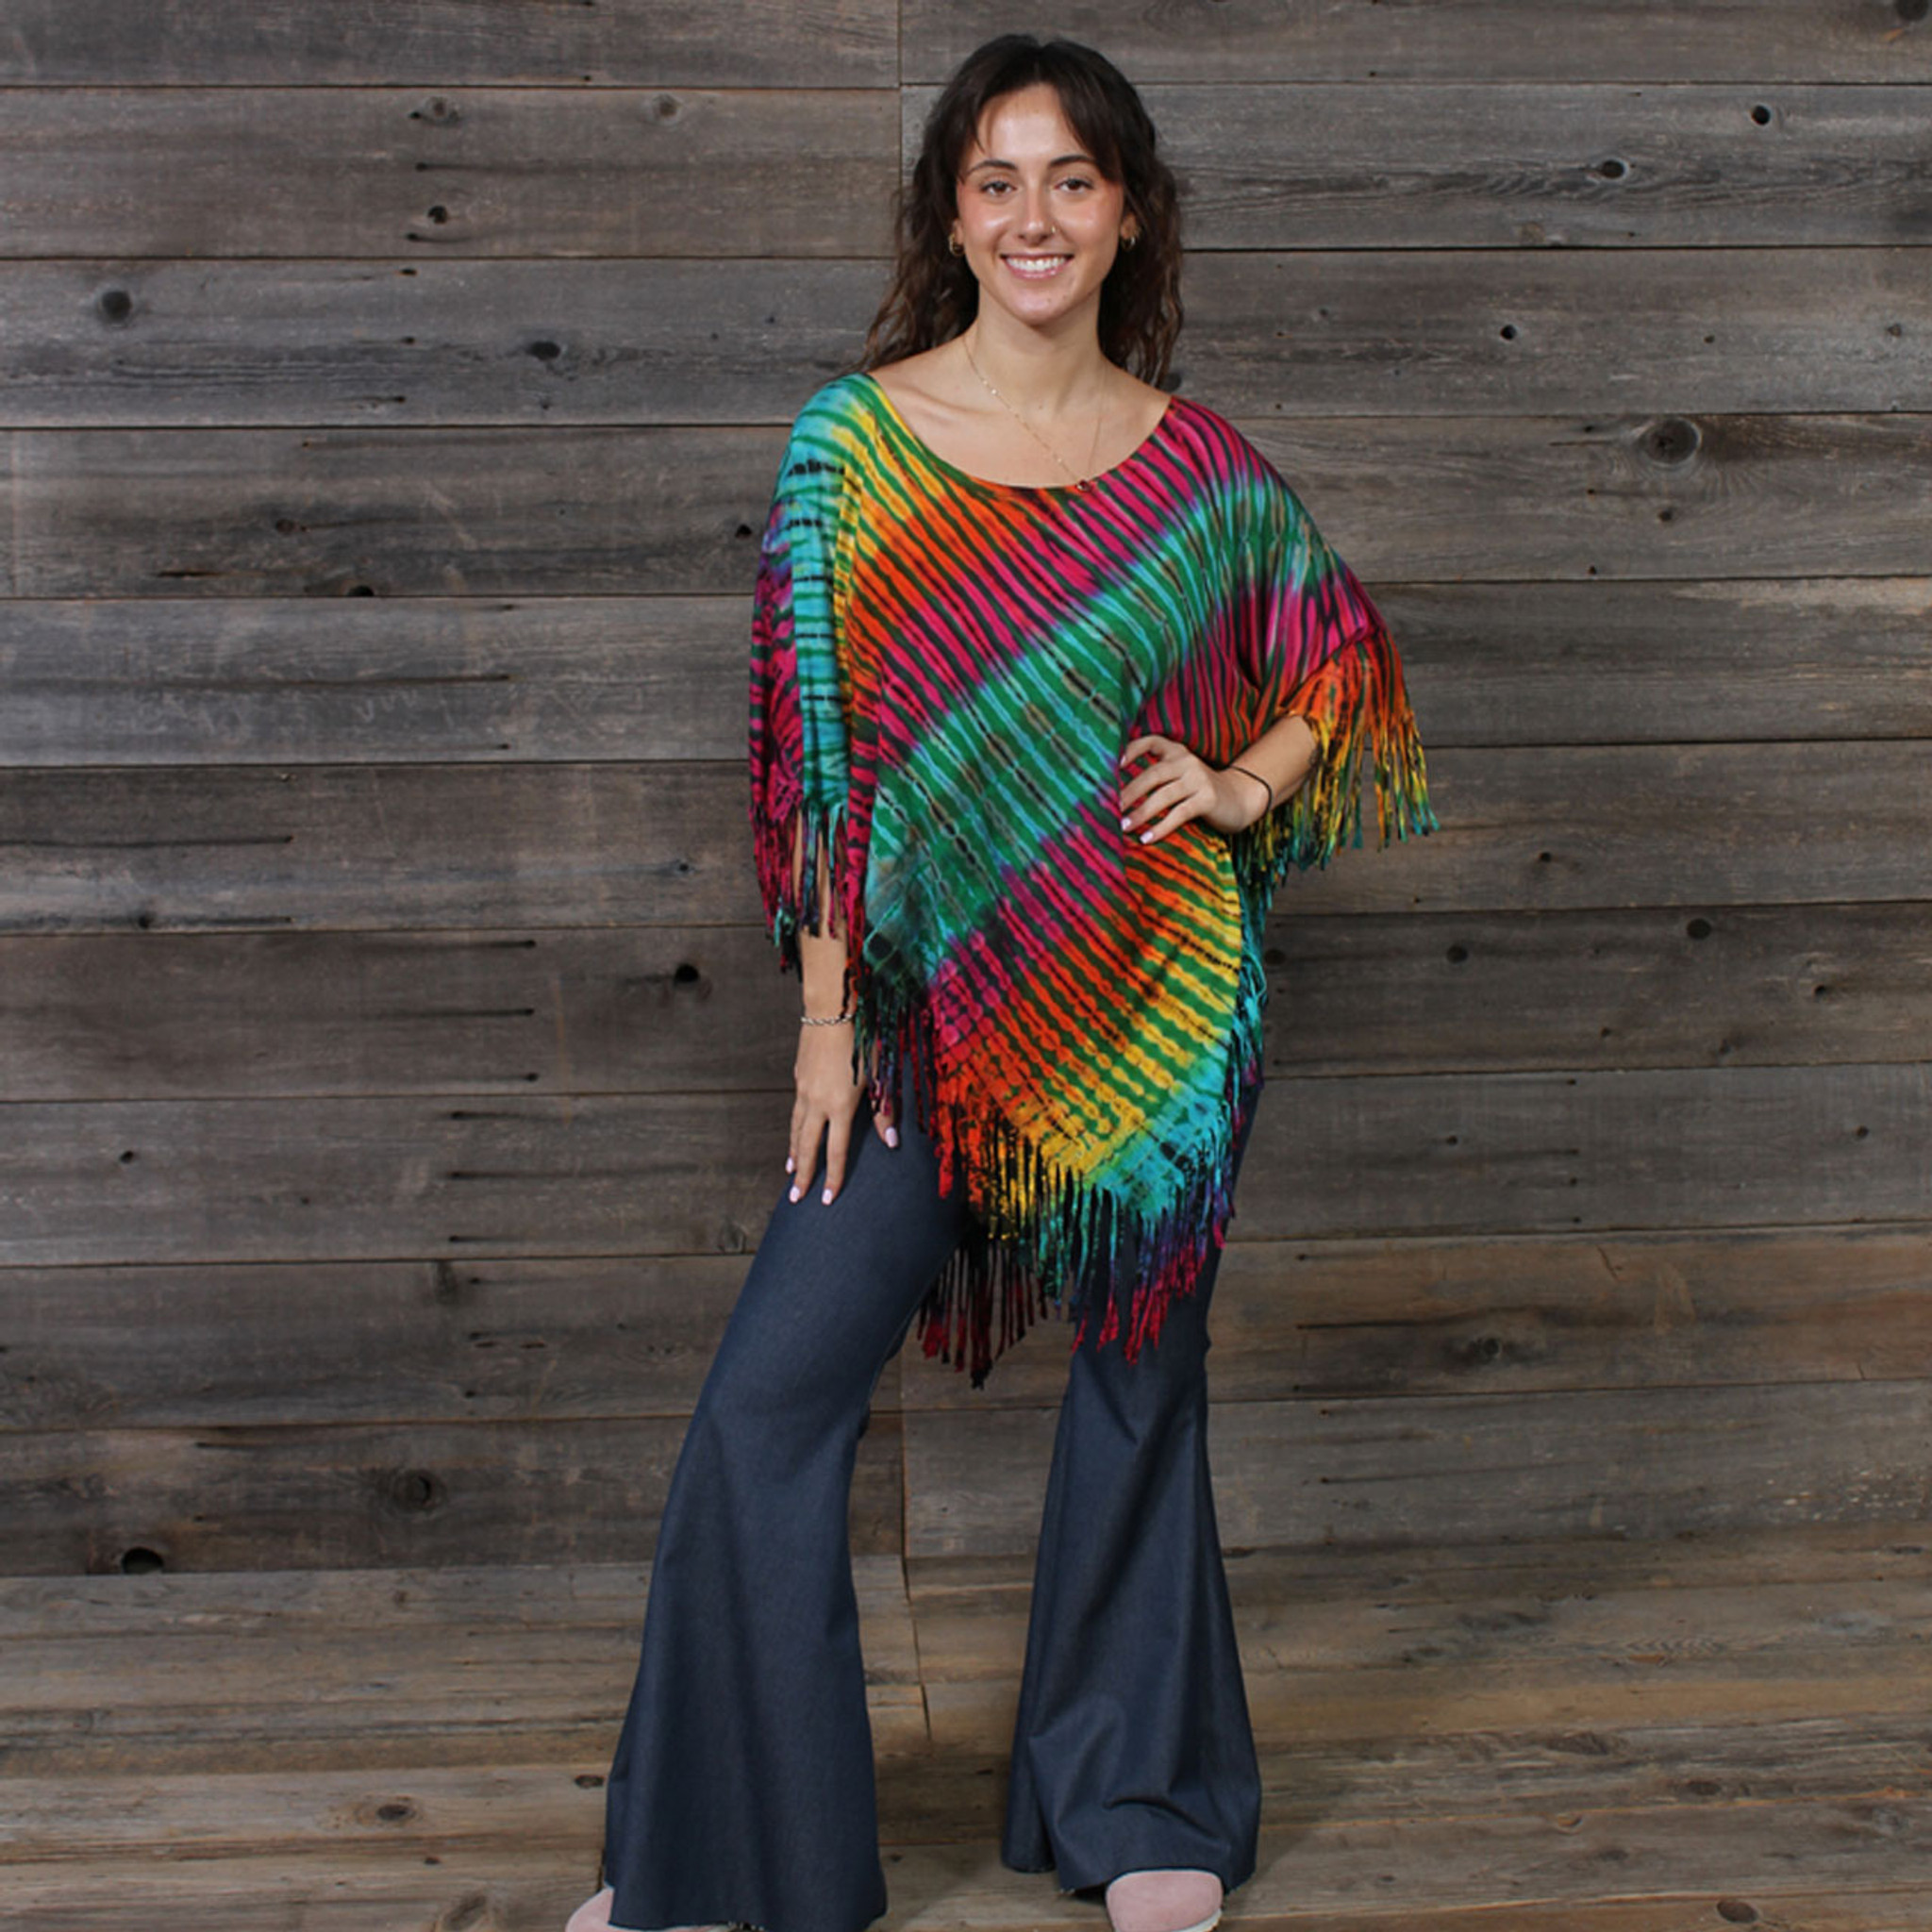 IN THE BRIGHT LIGHT FRINGE PONCHO Rayon Spandex Fringe Poncho Top Green Rainbow Tie Dye